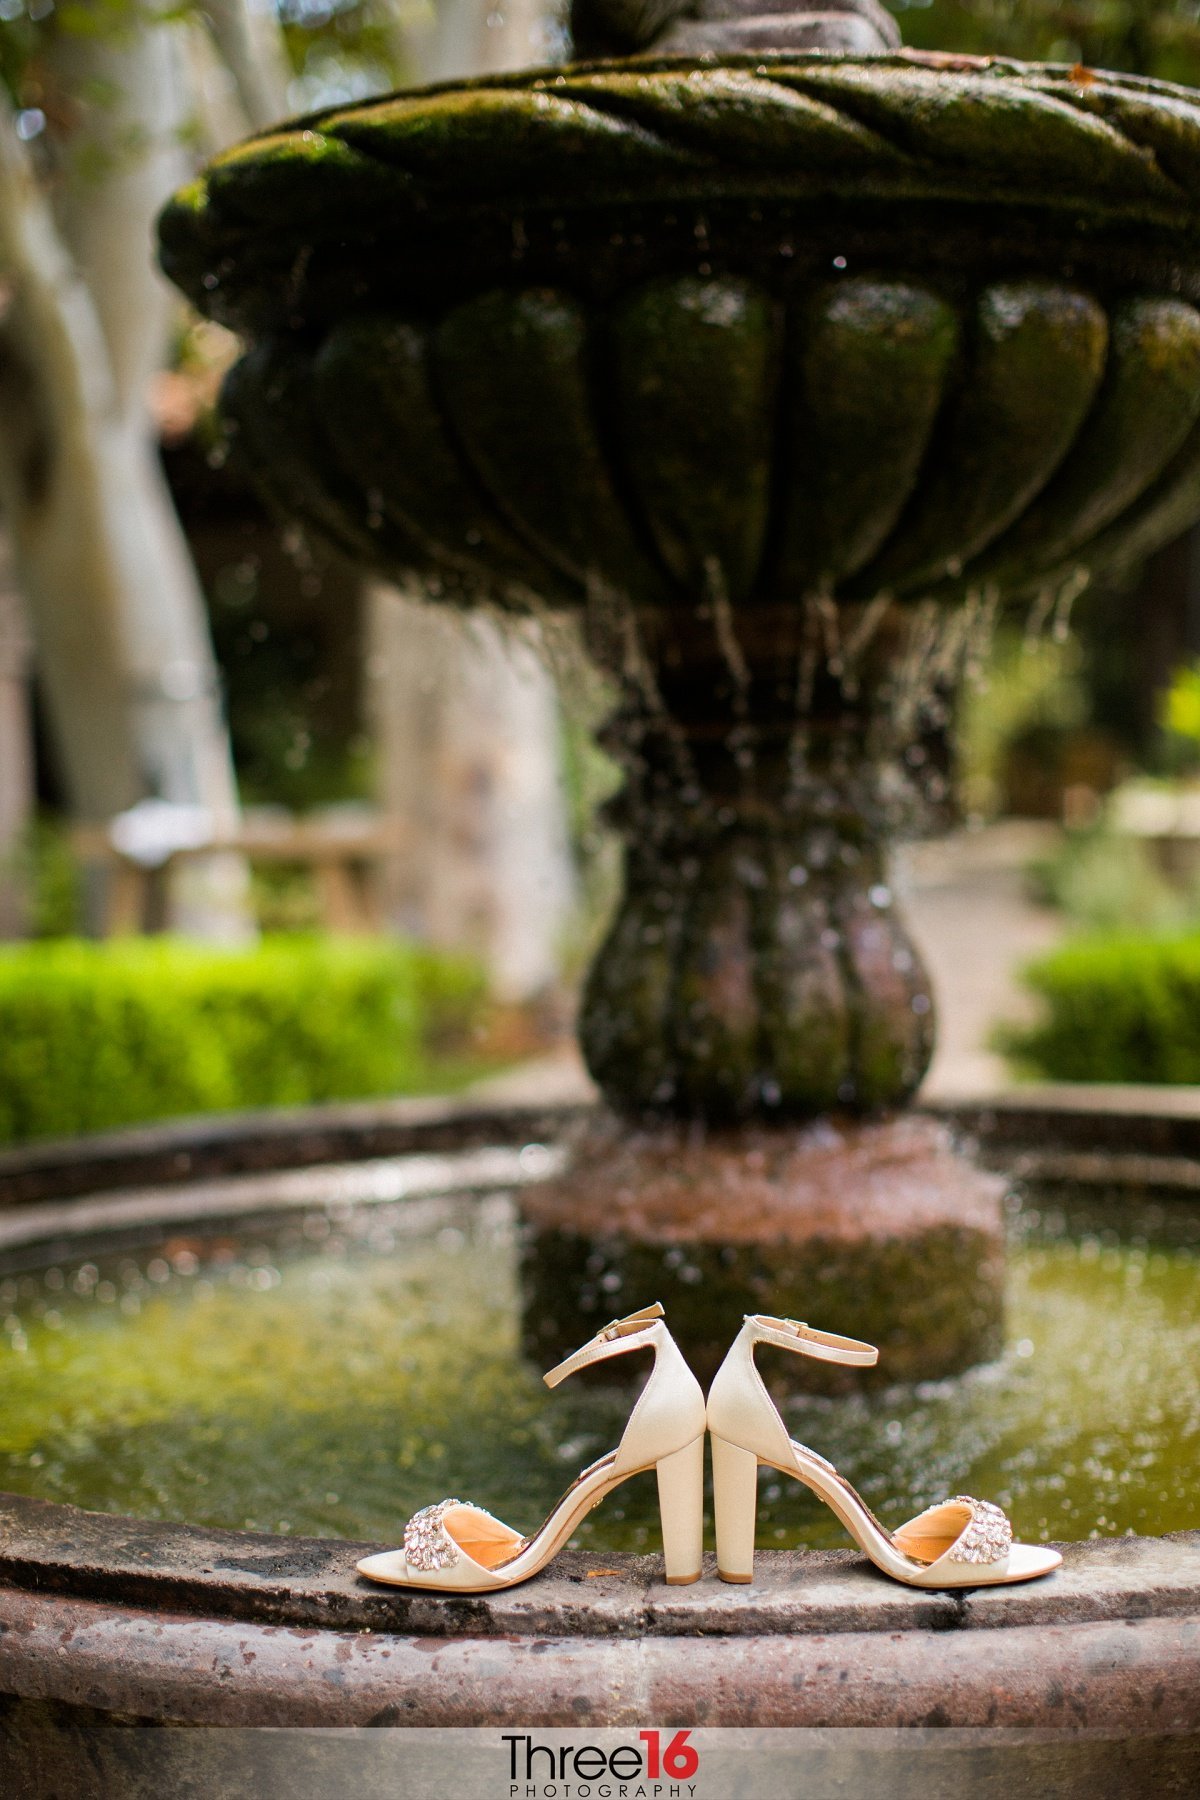 Bride's wedding day dress shoes sit on the edge of a beautiful water fountain prior to the ceremony